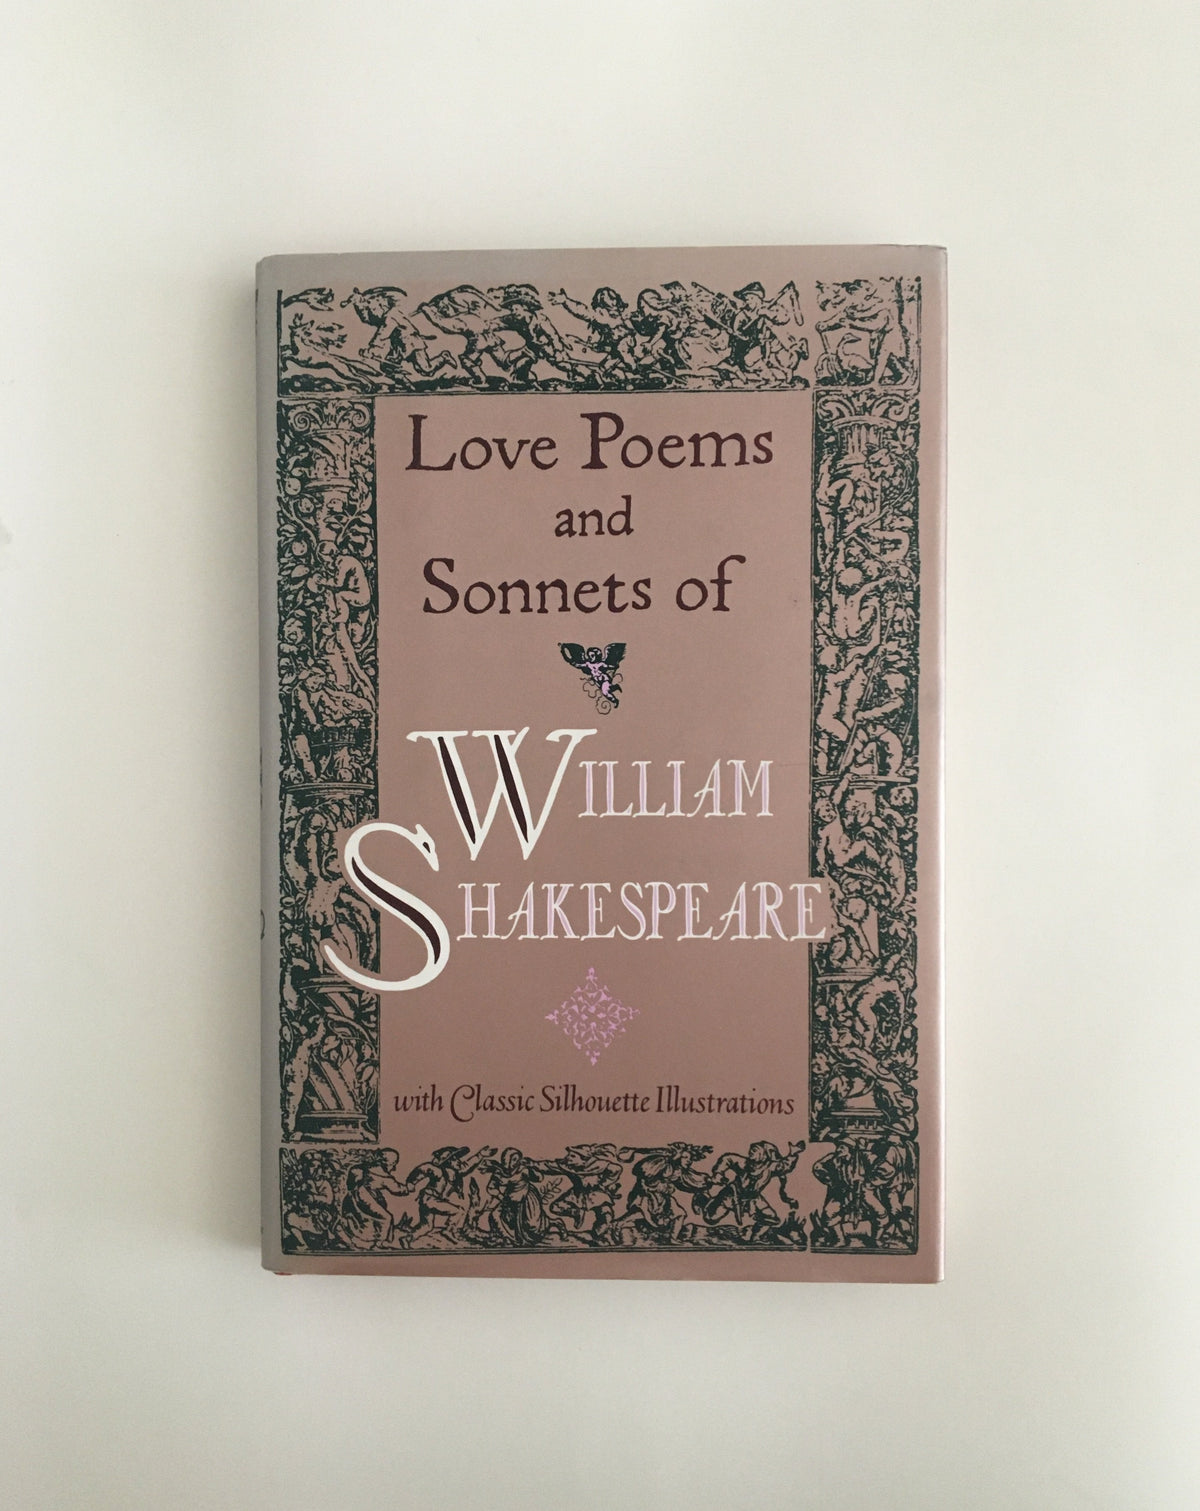 Love Poems and Sonnets of William Shakespeare by William Shakespeare